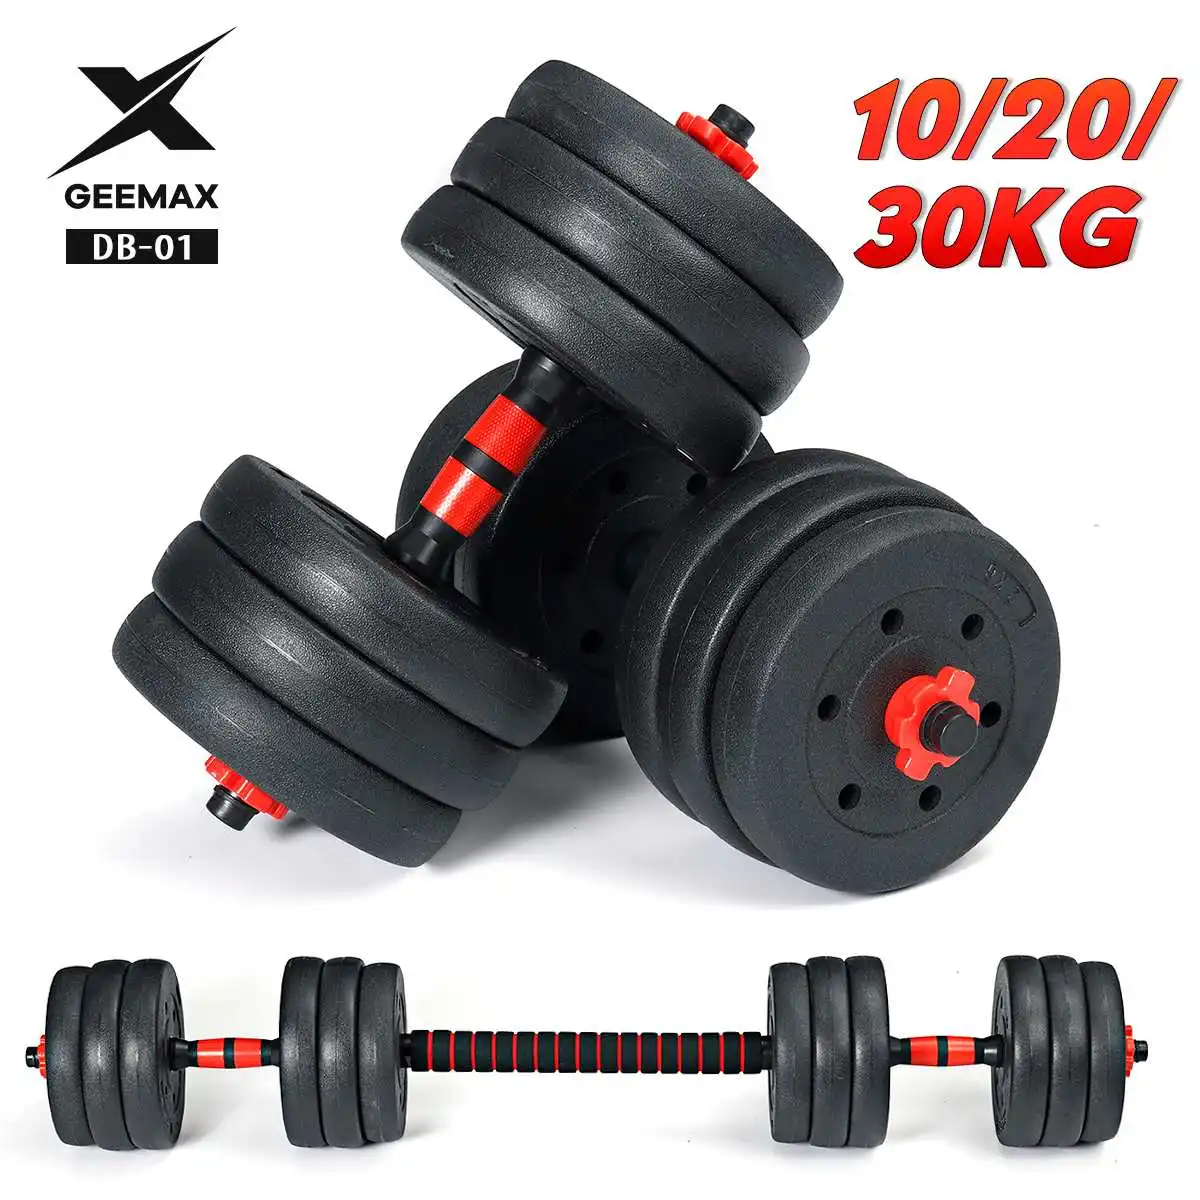 Geemax Adjustable Set Of Dumbbells Workout Weights Exercise Body Building Fitness Equipment Dumbbell Weights Set - Dumbbells - AliExpress